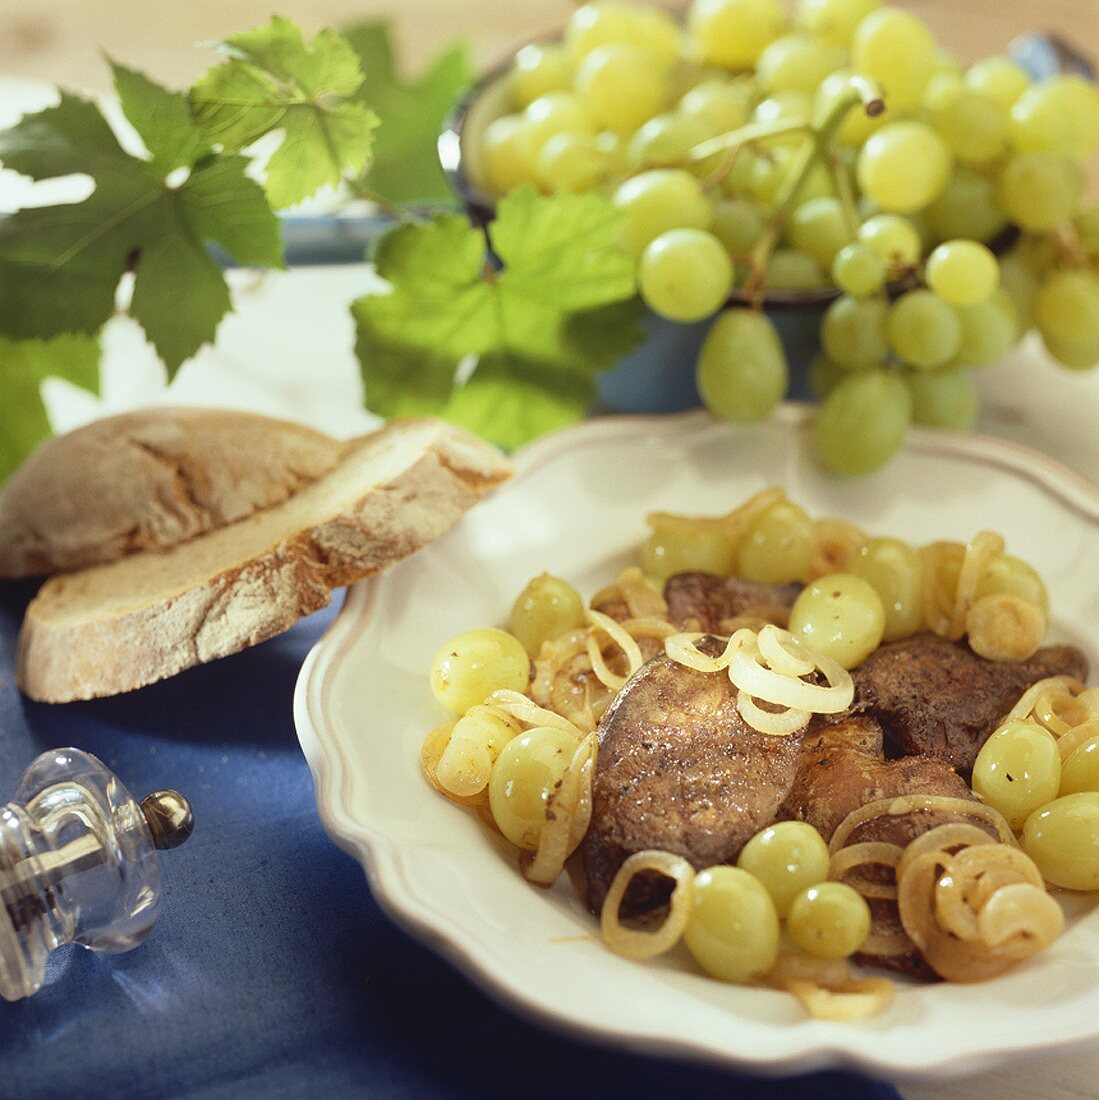 Fried poultry livers with onions and grapes